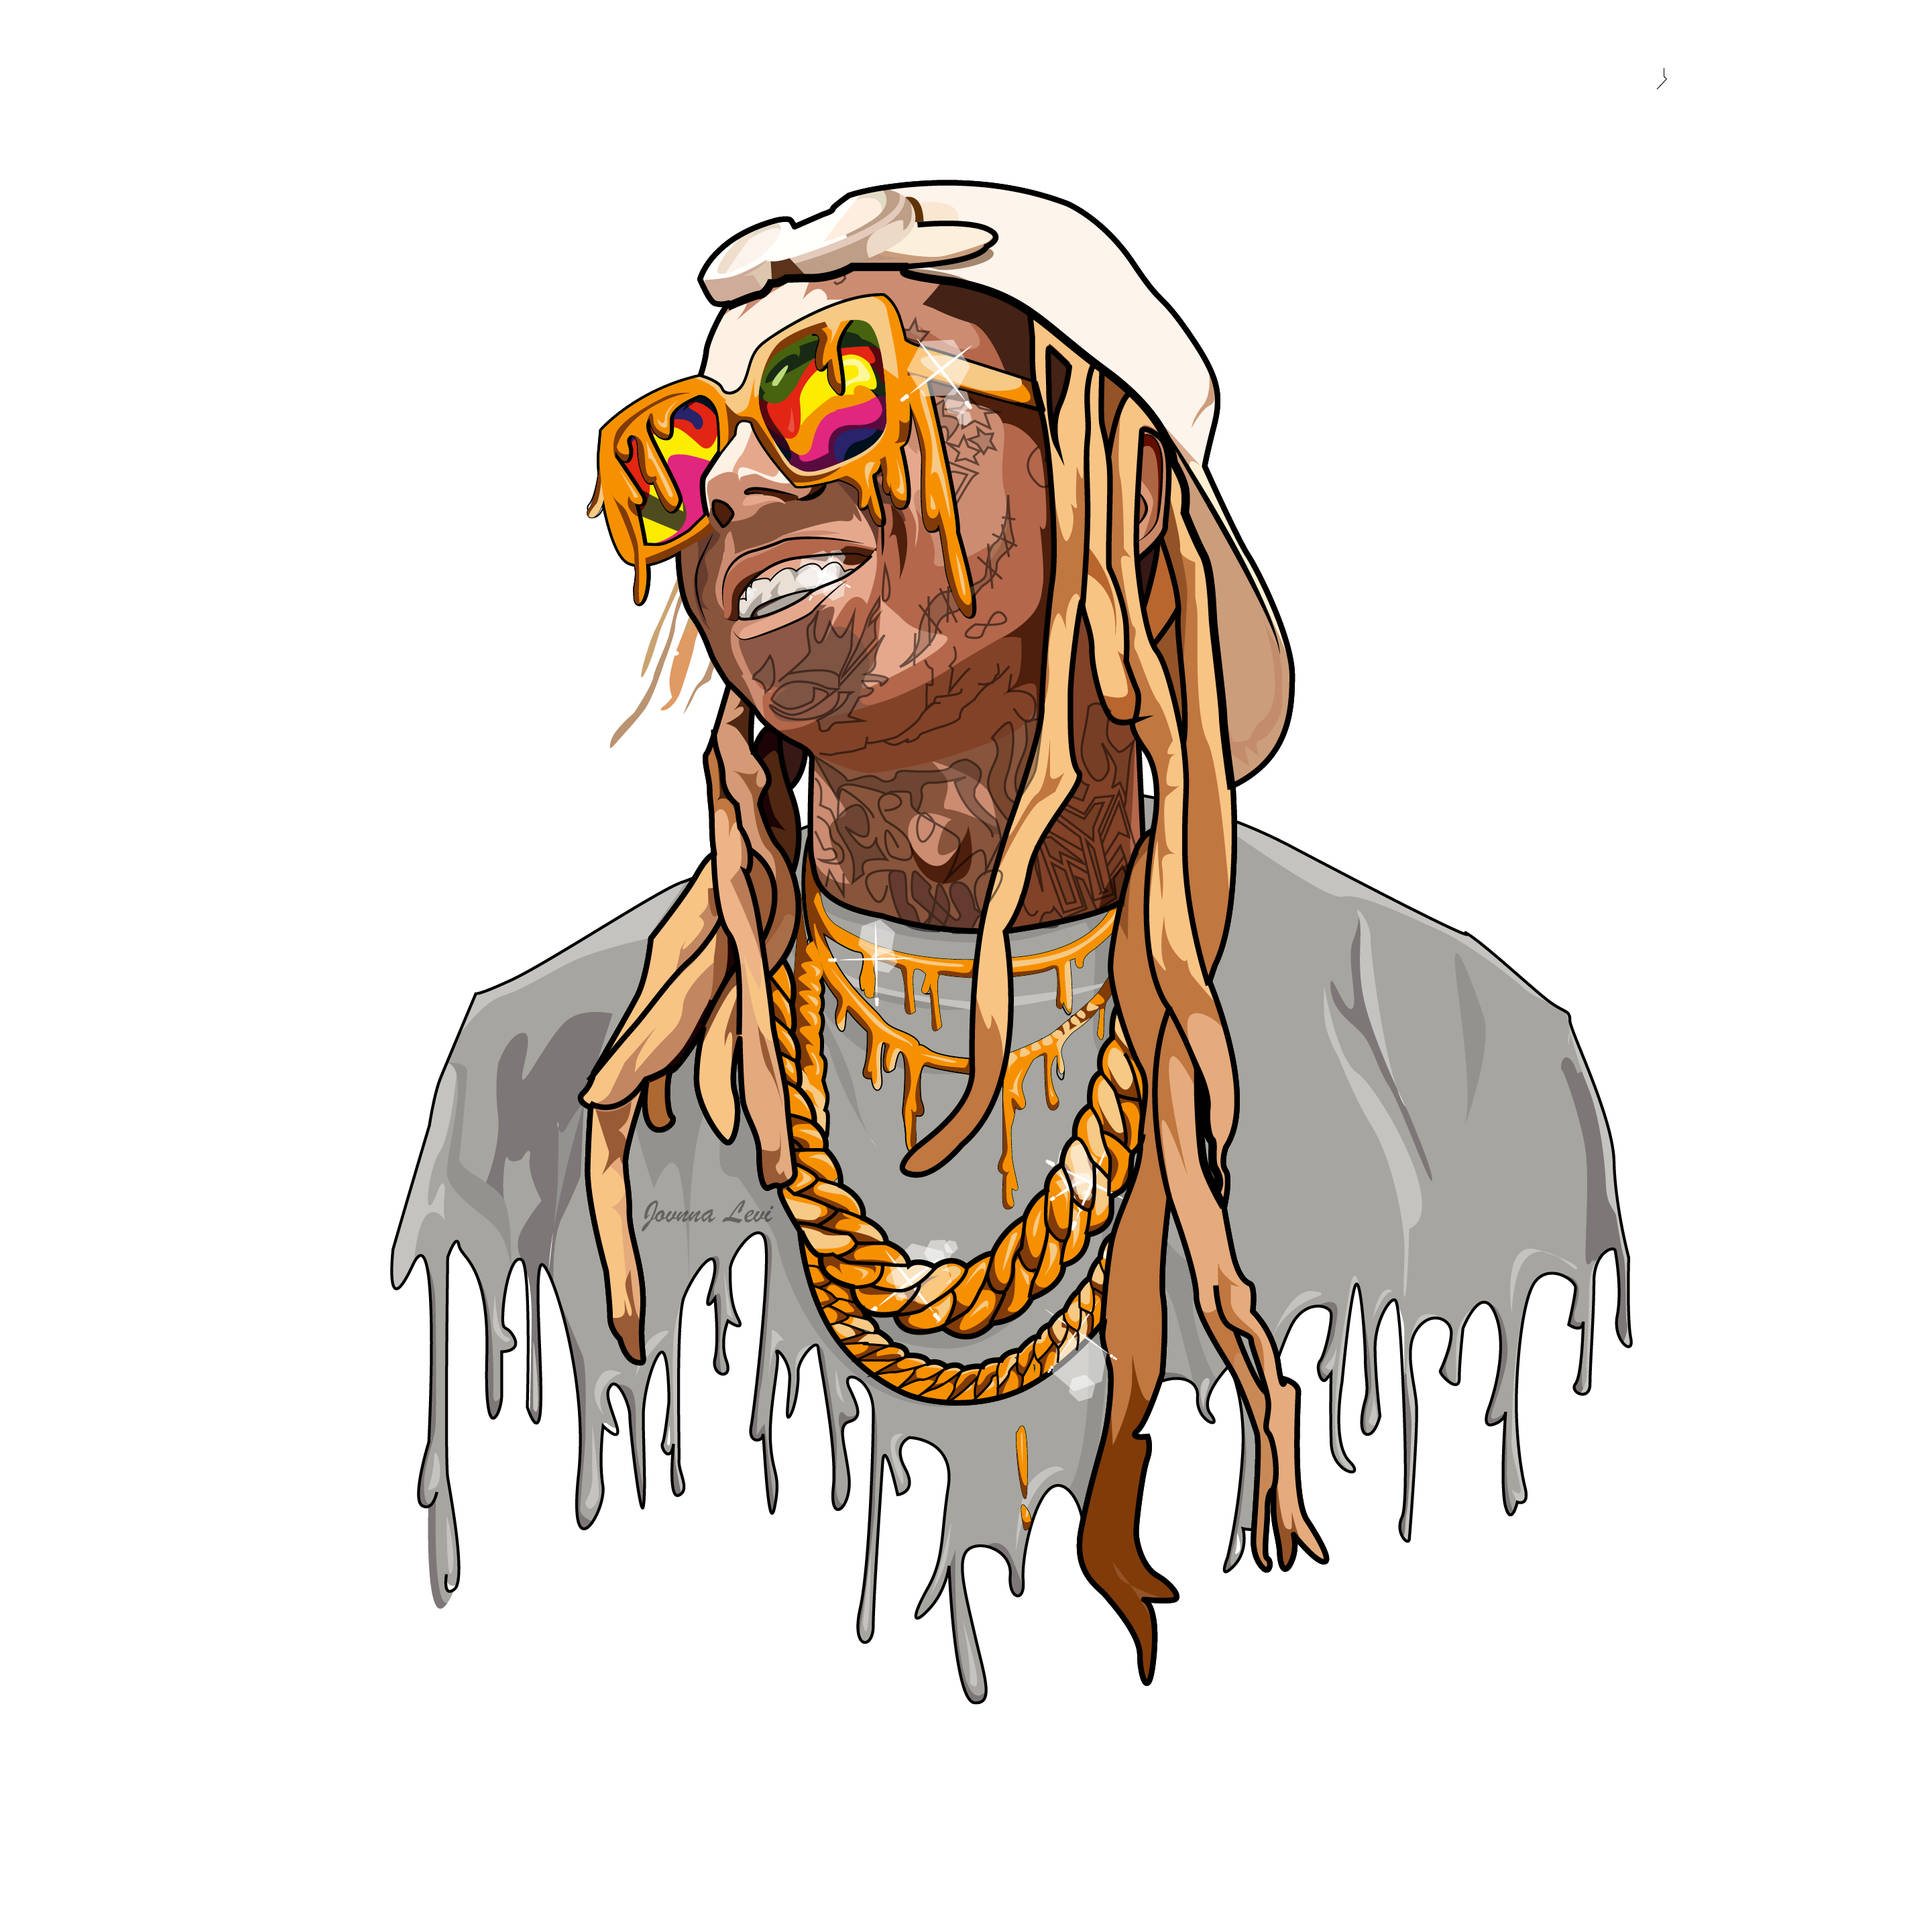 Lil Wayne 2862X2863 Wallpaper and Background Image